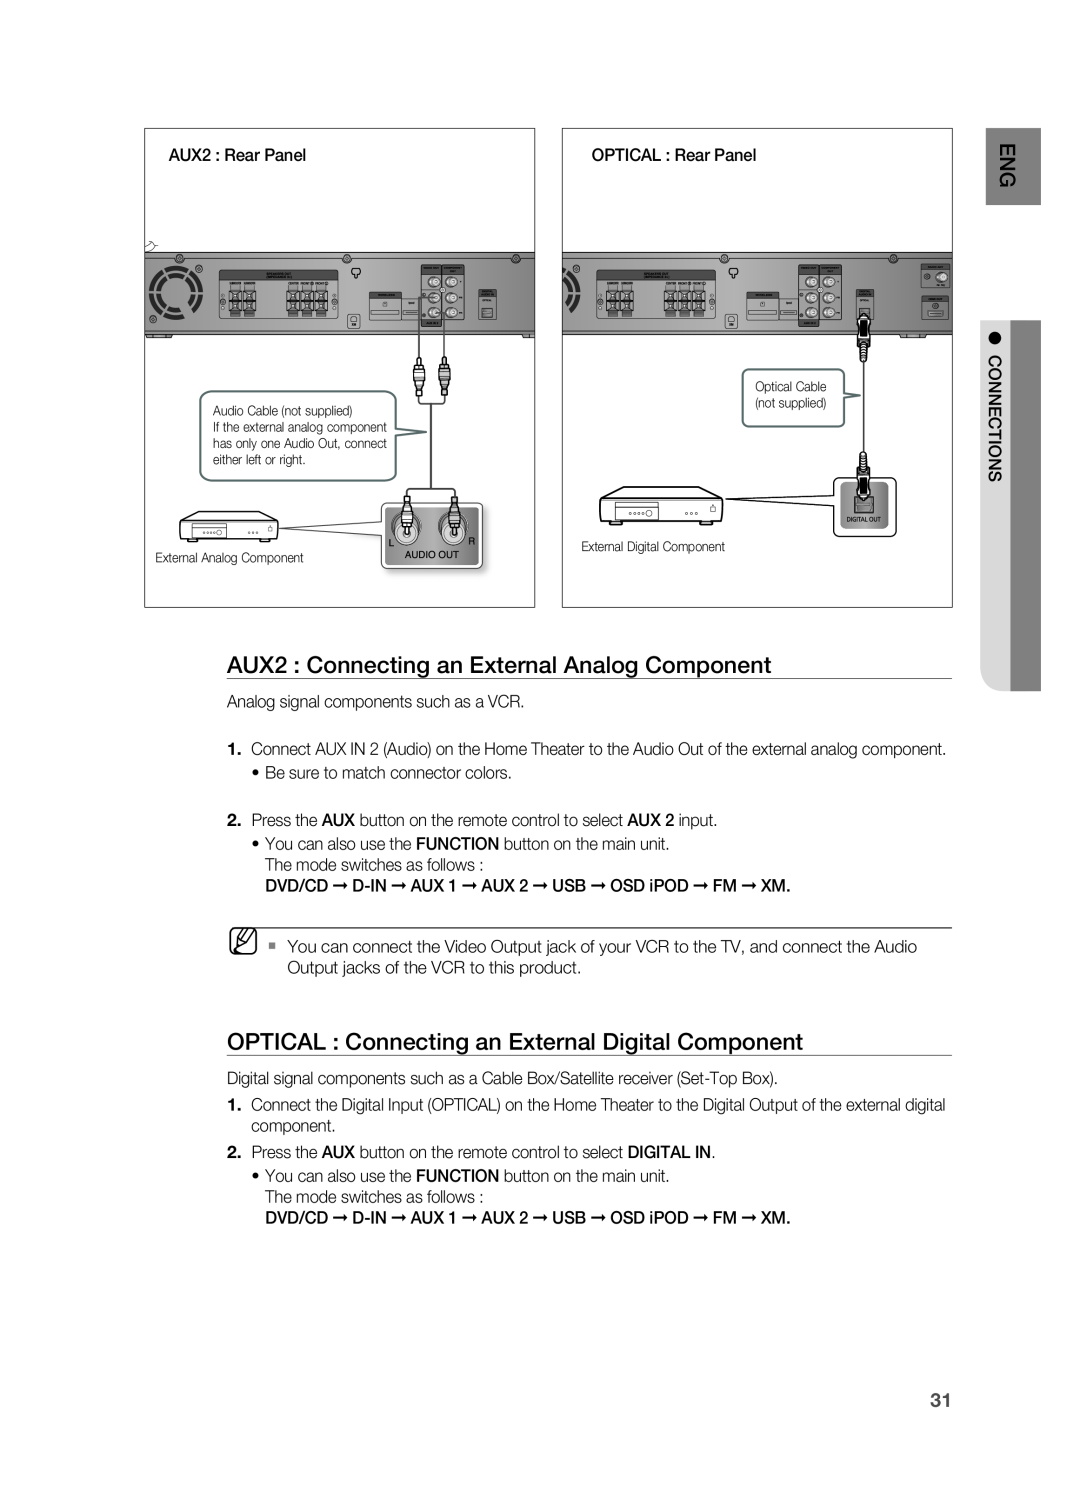 Samsung HT-TZ515 user manual AUX2 Connecting an External Analog Component 